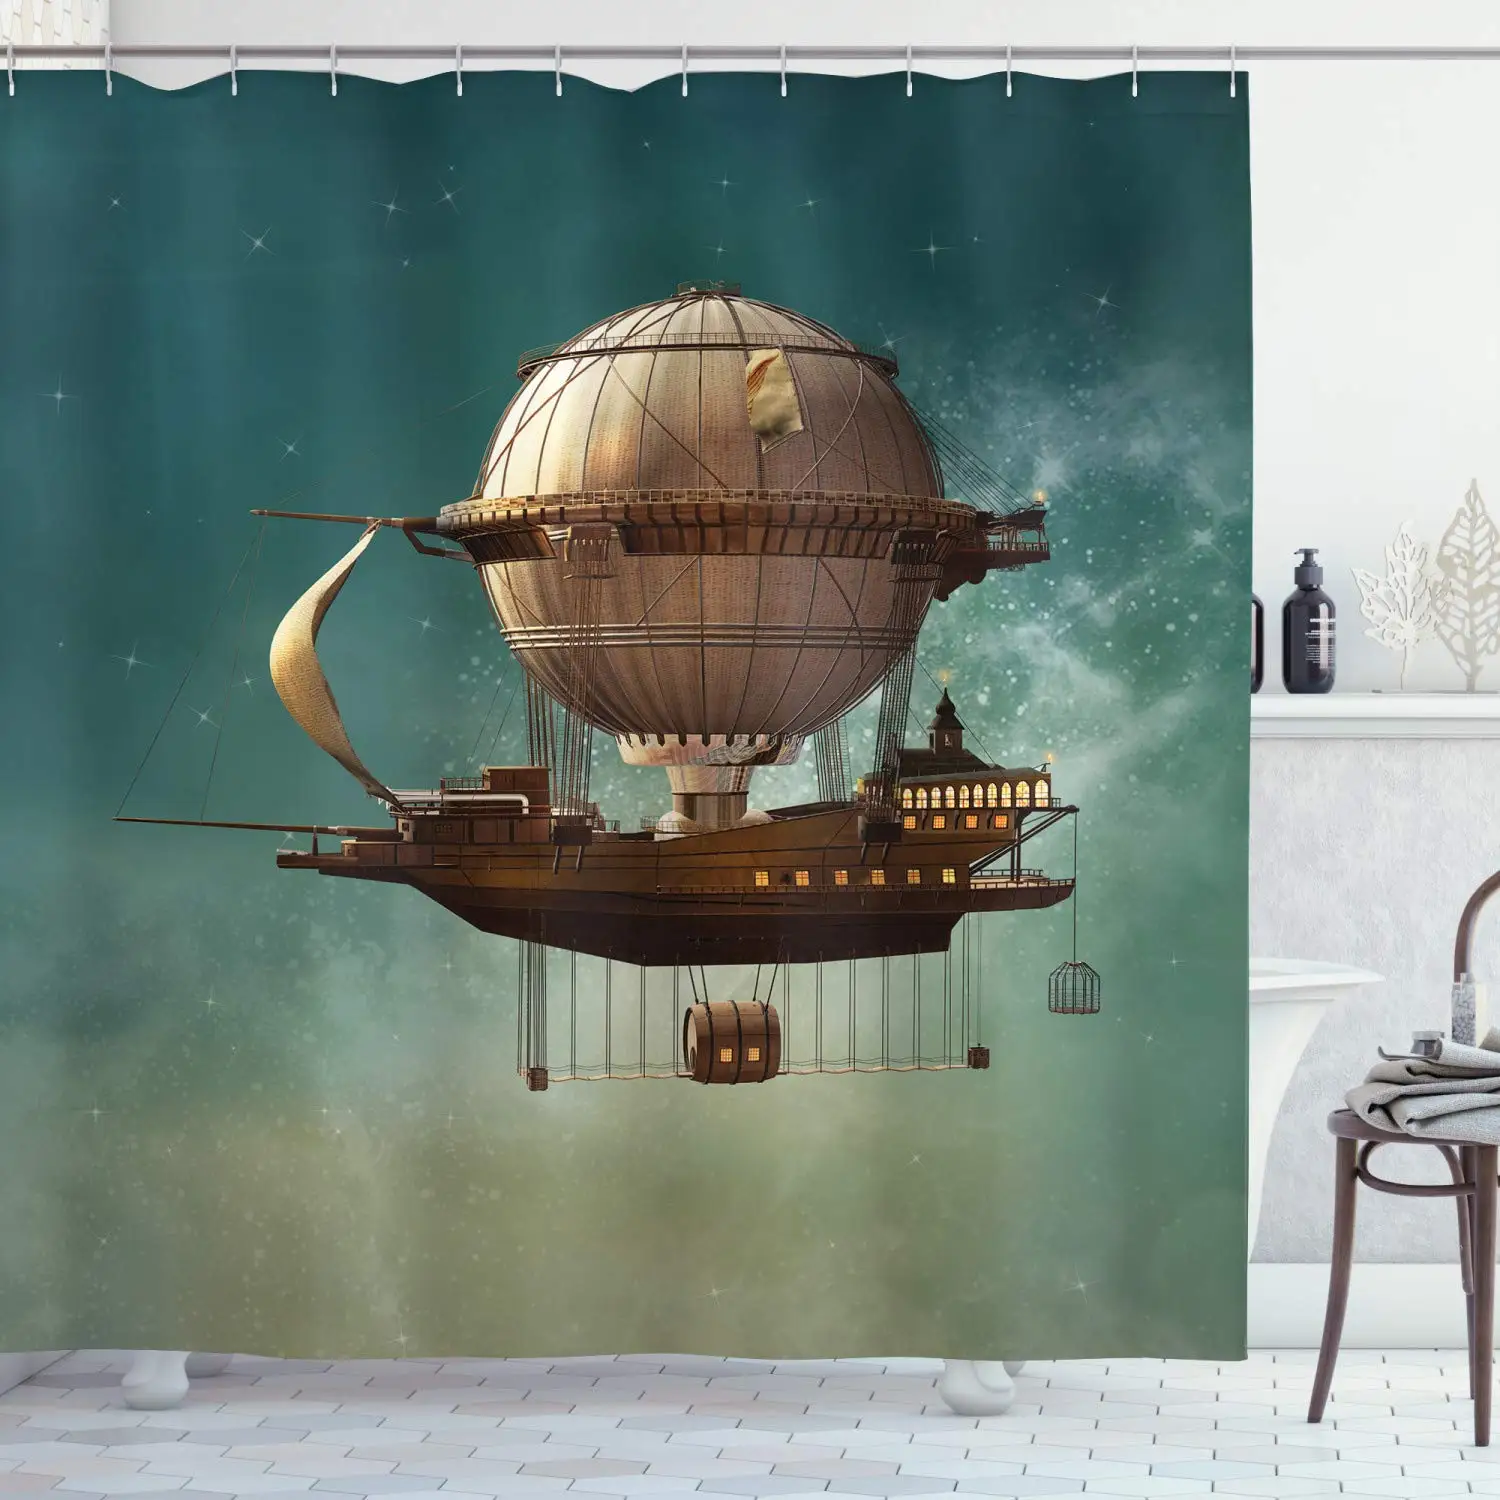 

Fantasy Shower Curtain Surreal Sky Scenery Steampunk Airship Sci Fi Stardust Space Image Bathroom Decor Set with Hook Home Decor